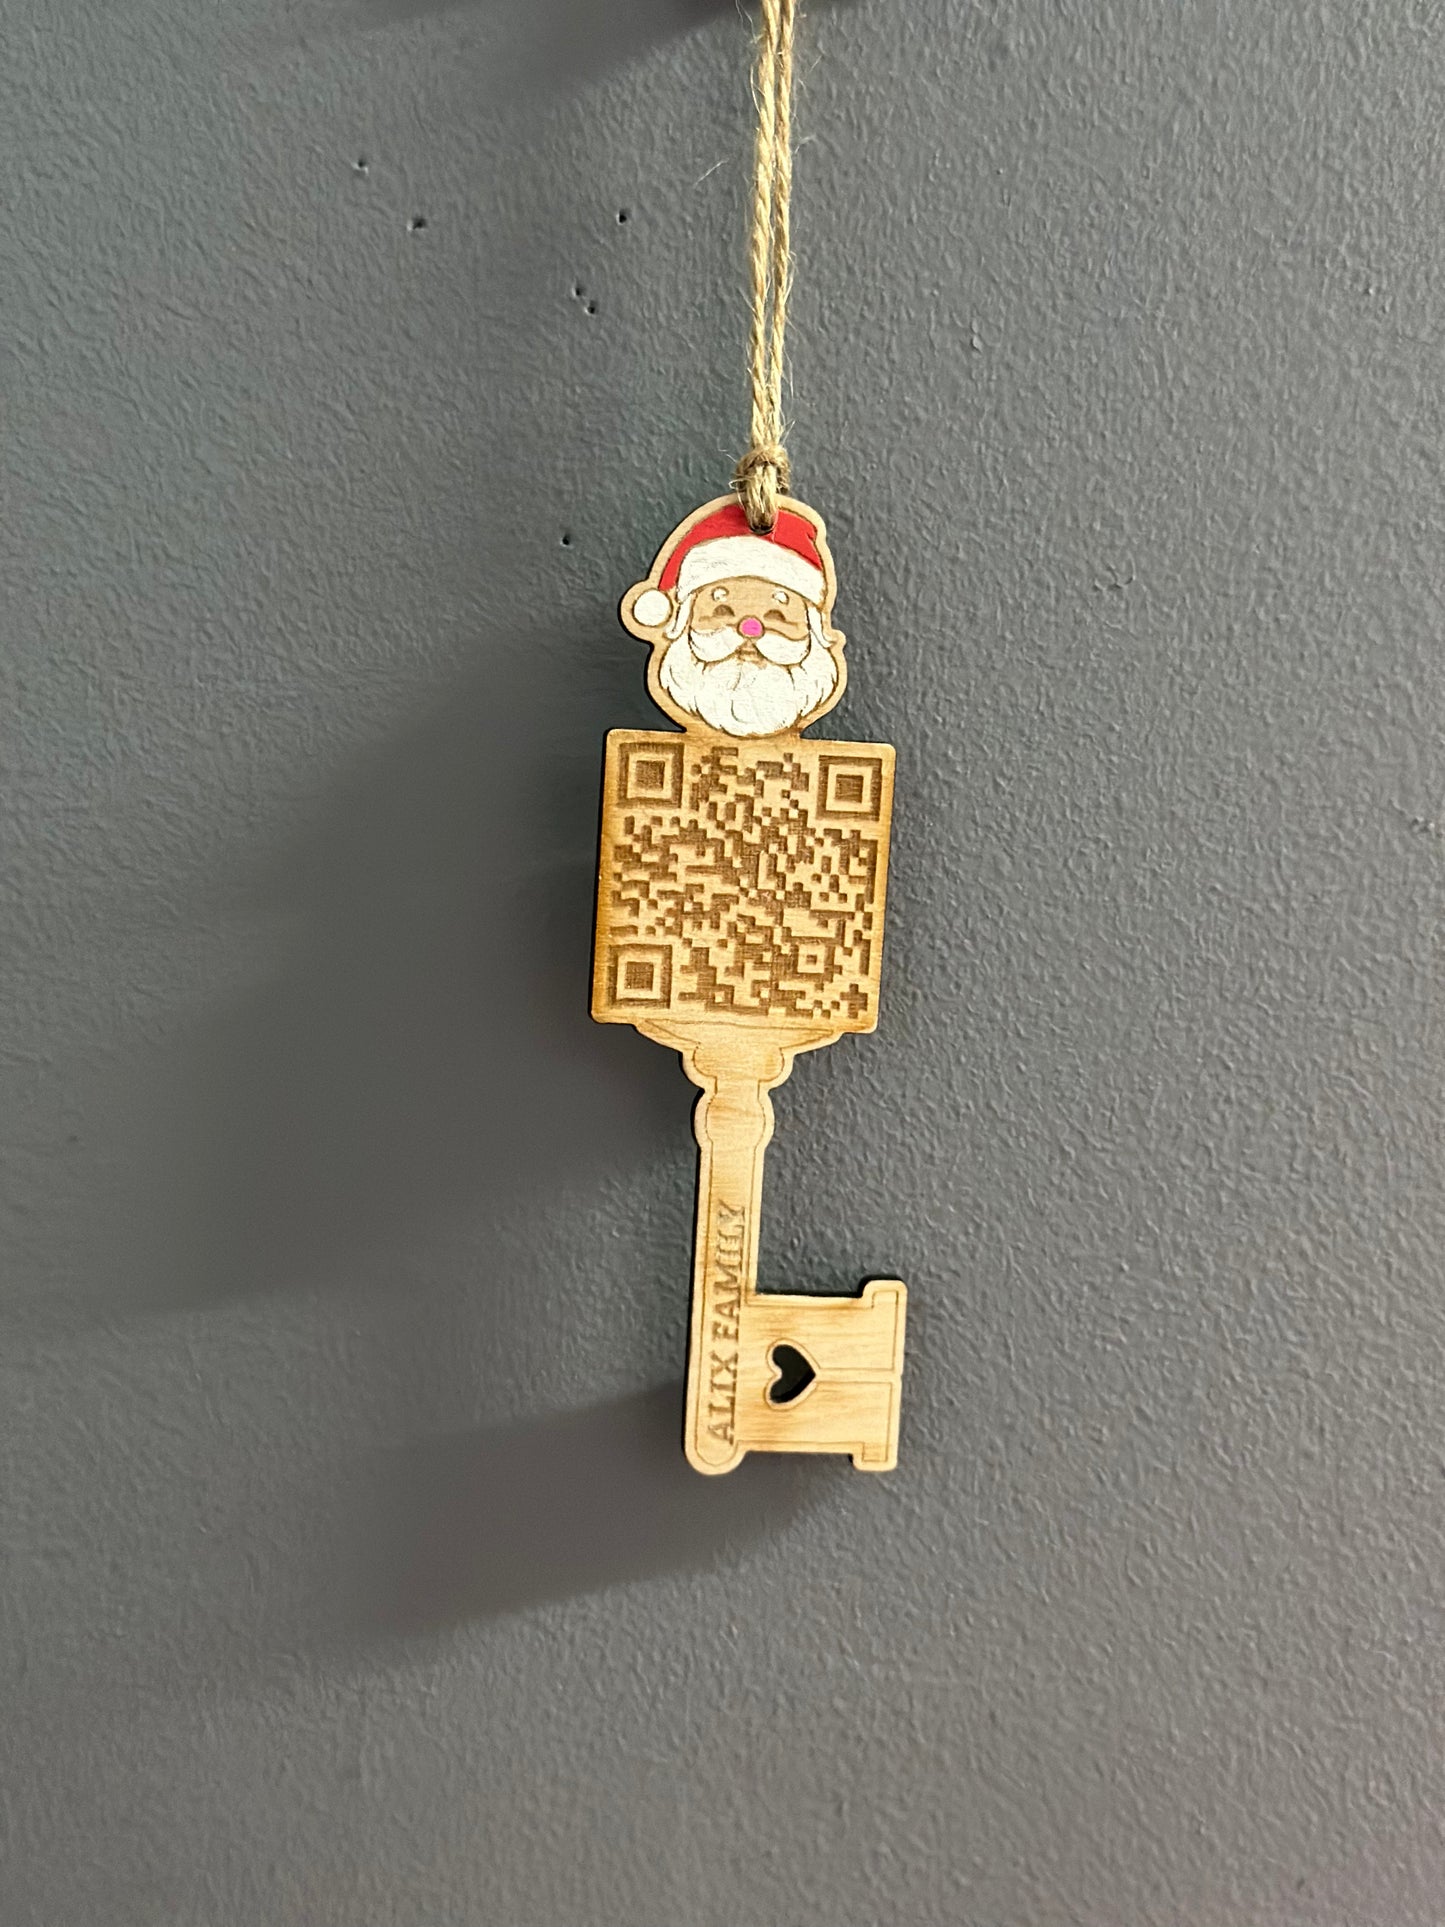 Santa’s Magical Key Tracking Ornament, Best Christmas Eve Box Gifts for Kids